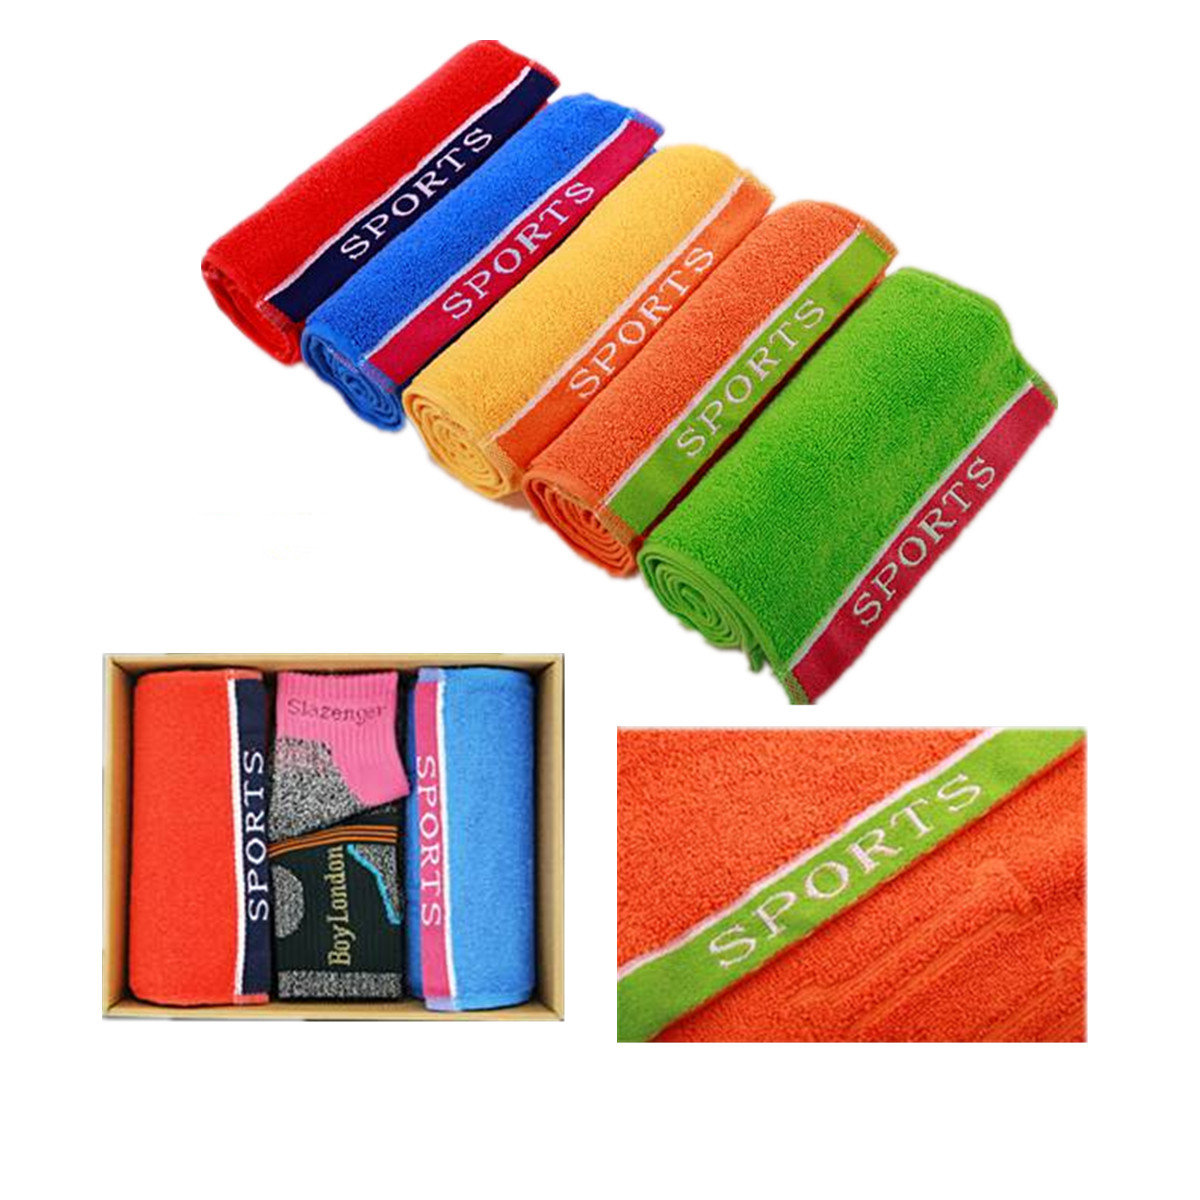 Sports Towel Set with Various Color Towels (YT-6655)